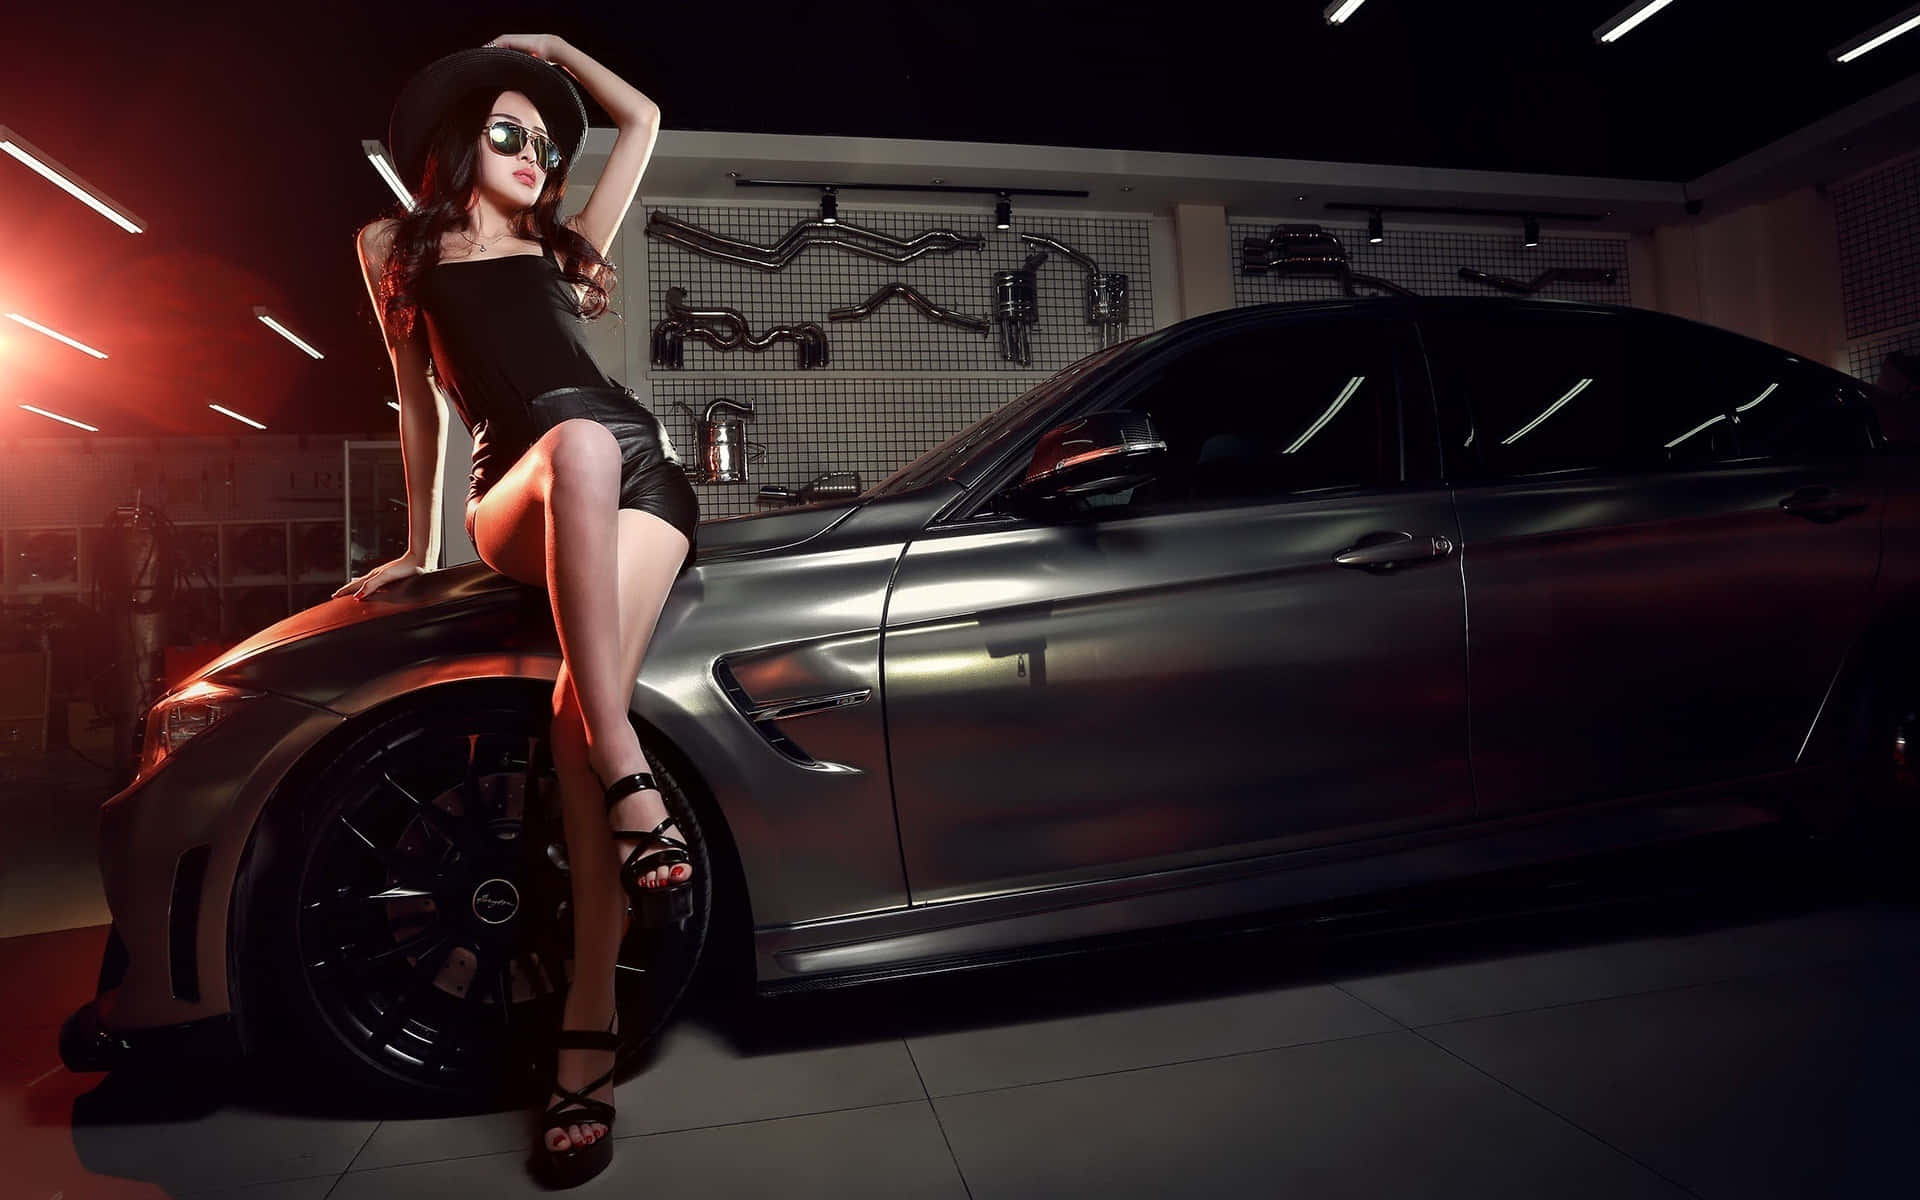 Woman Doing Sexy Pose On Car Wallpaper